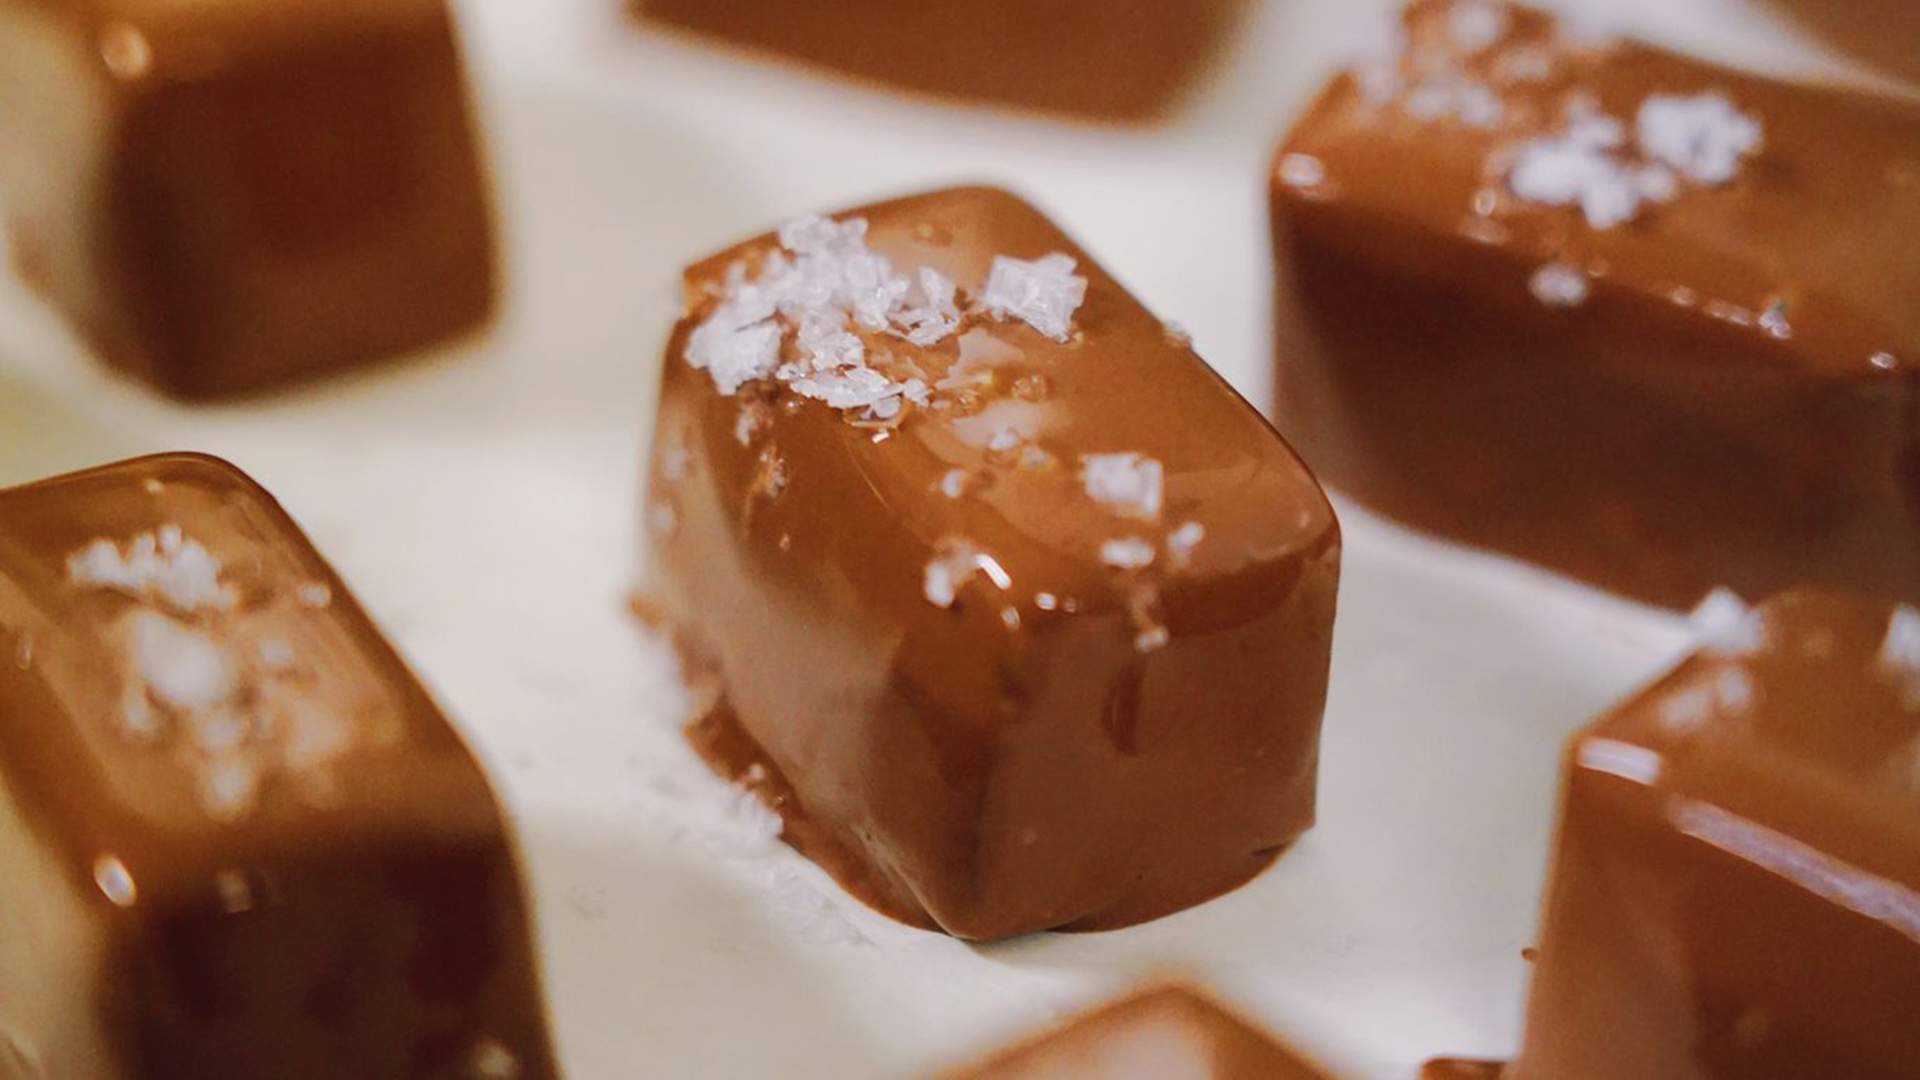 Pepe Saya Has Launched Its Own Delicious Range of Buttery Salted Caramel Bon Bons